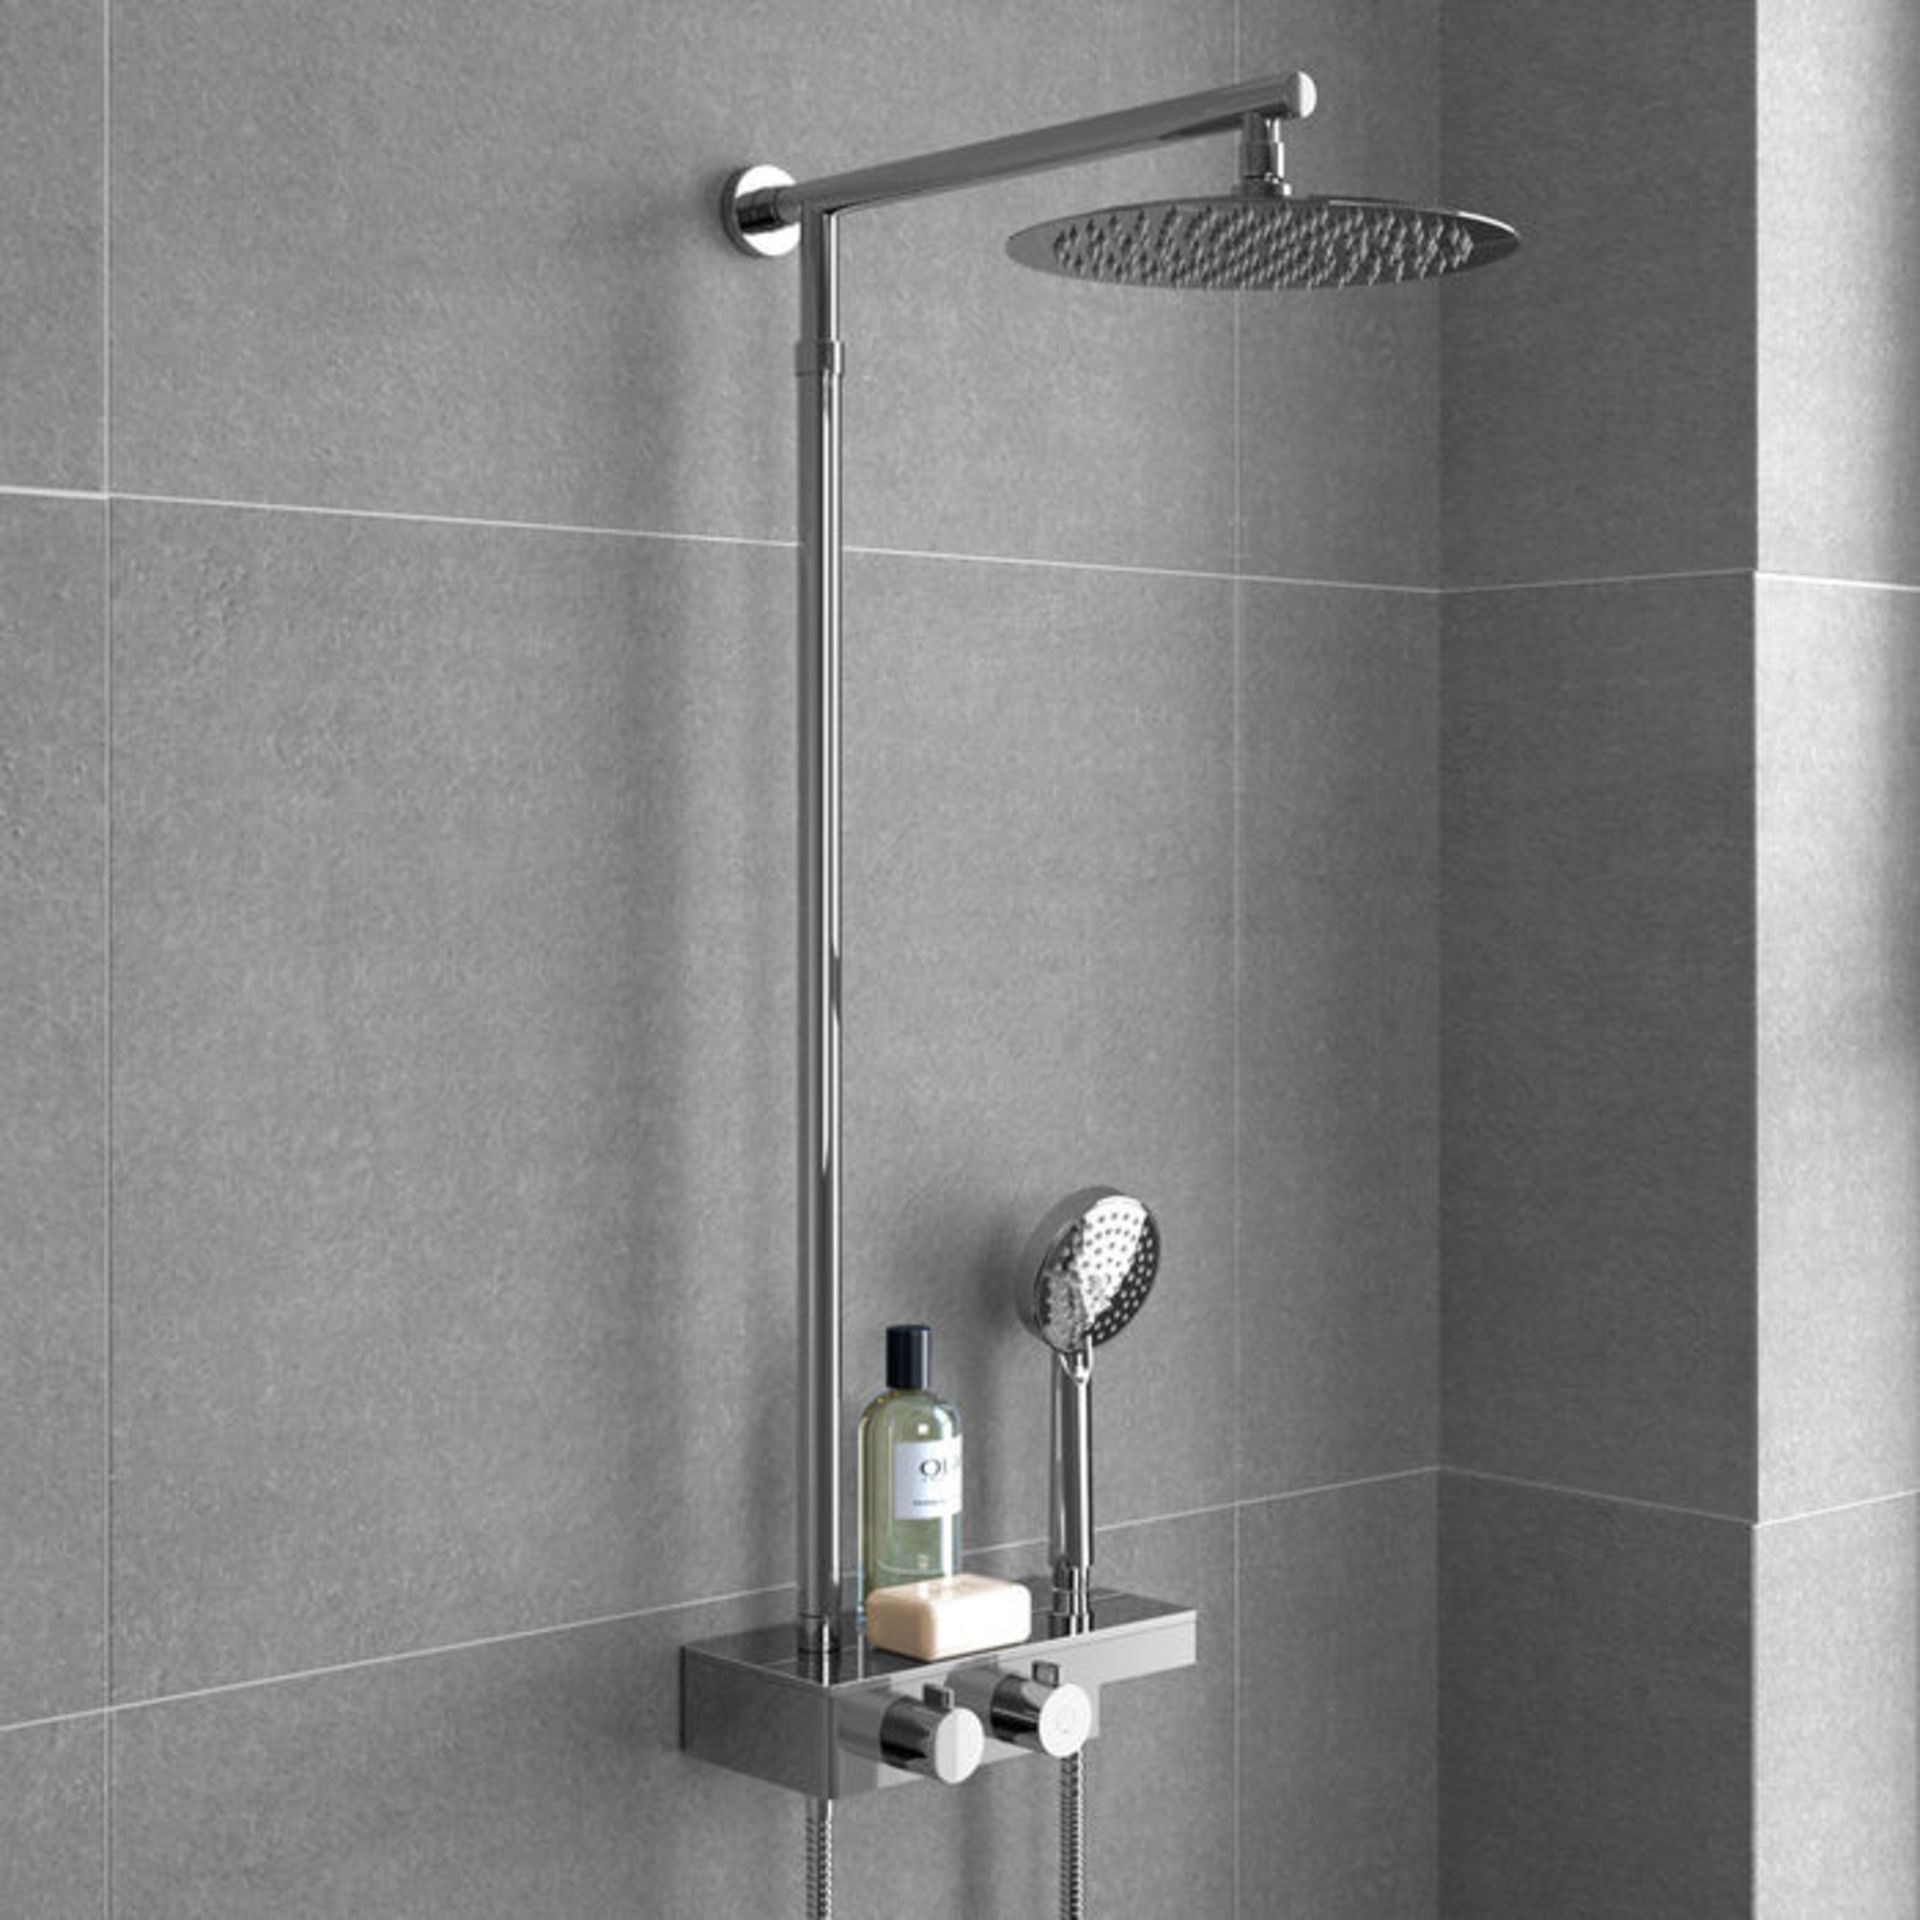 (TS134) Round Exposed Thermostatic Mixer Shower Kit & Large Head. Cool to touch shower for - Image 3 of 4